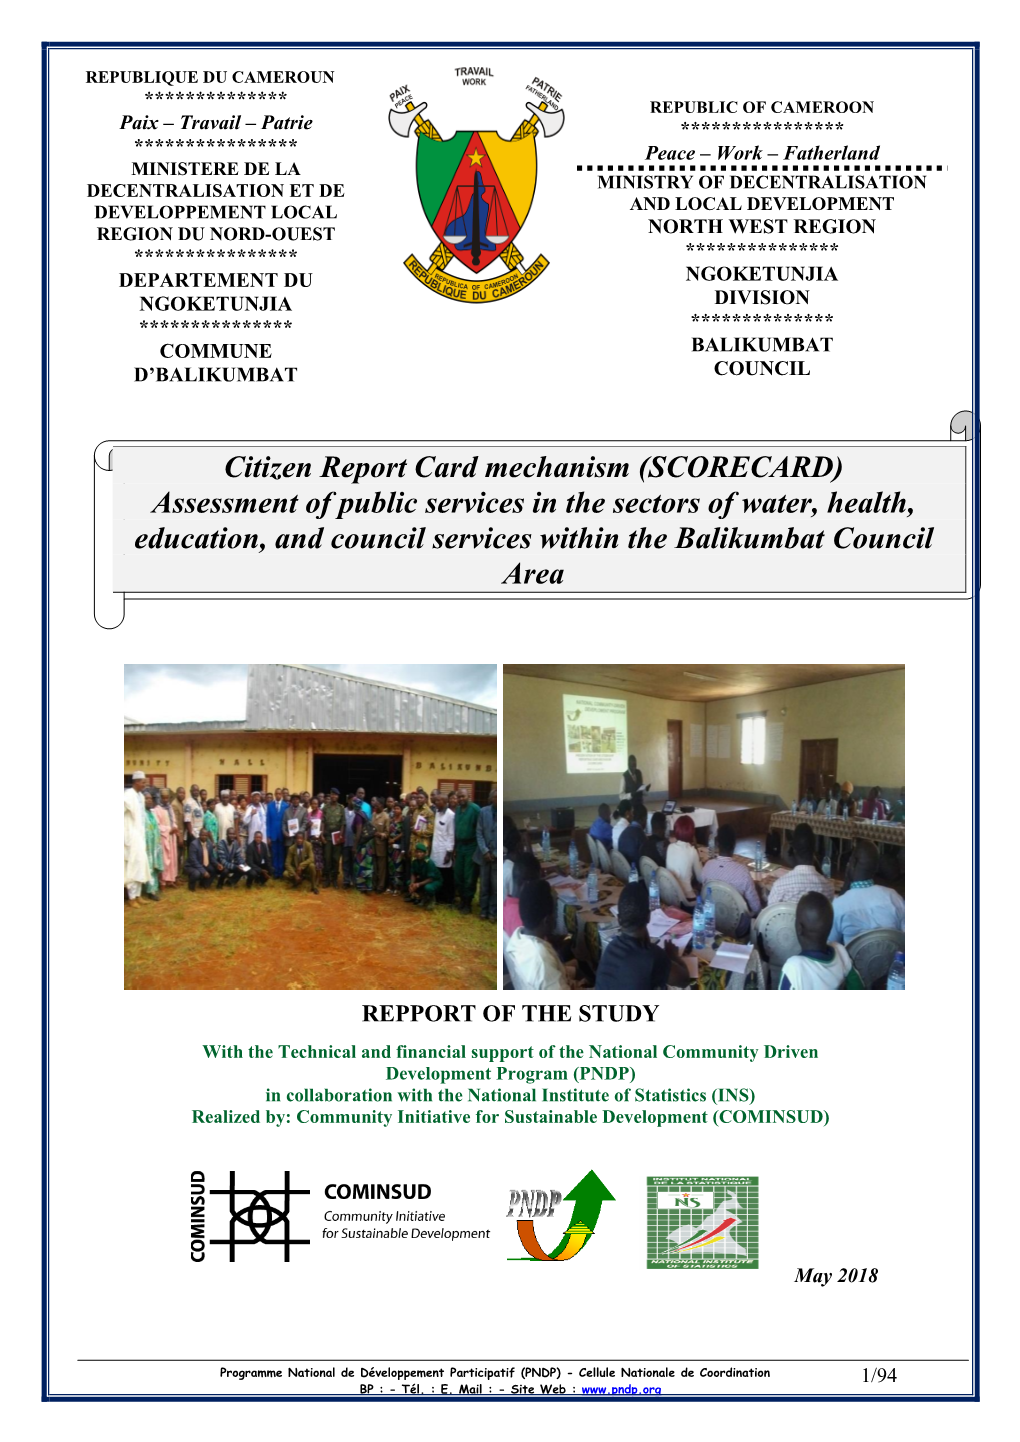 SCORECARD) Assessment of Public Services in the Sectors of Water, Health, Education, and Council Services Within the Balikumbat Council Area